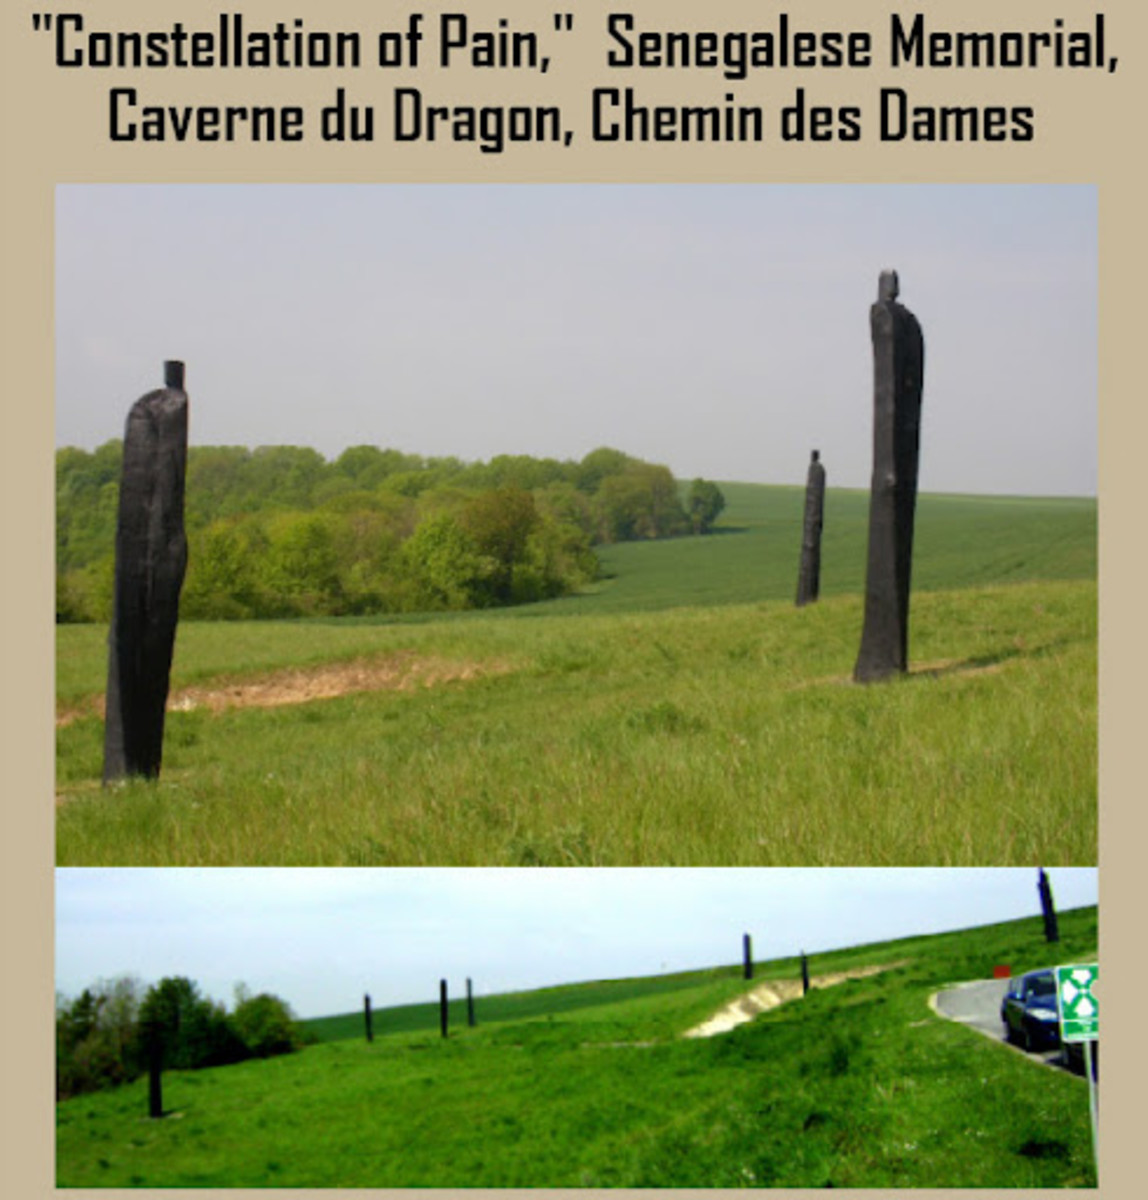 One of the most haunting monuments to the soldiers who fell at the Chemin des Dames, in this case Tirailleurs sénégalais 